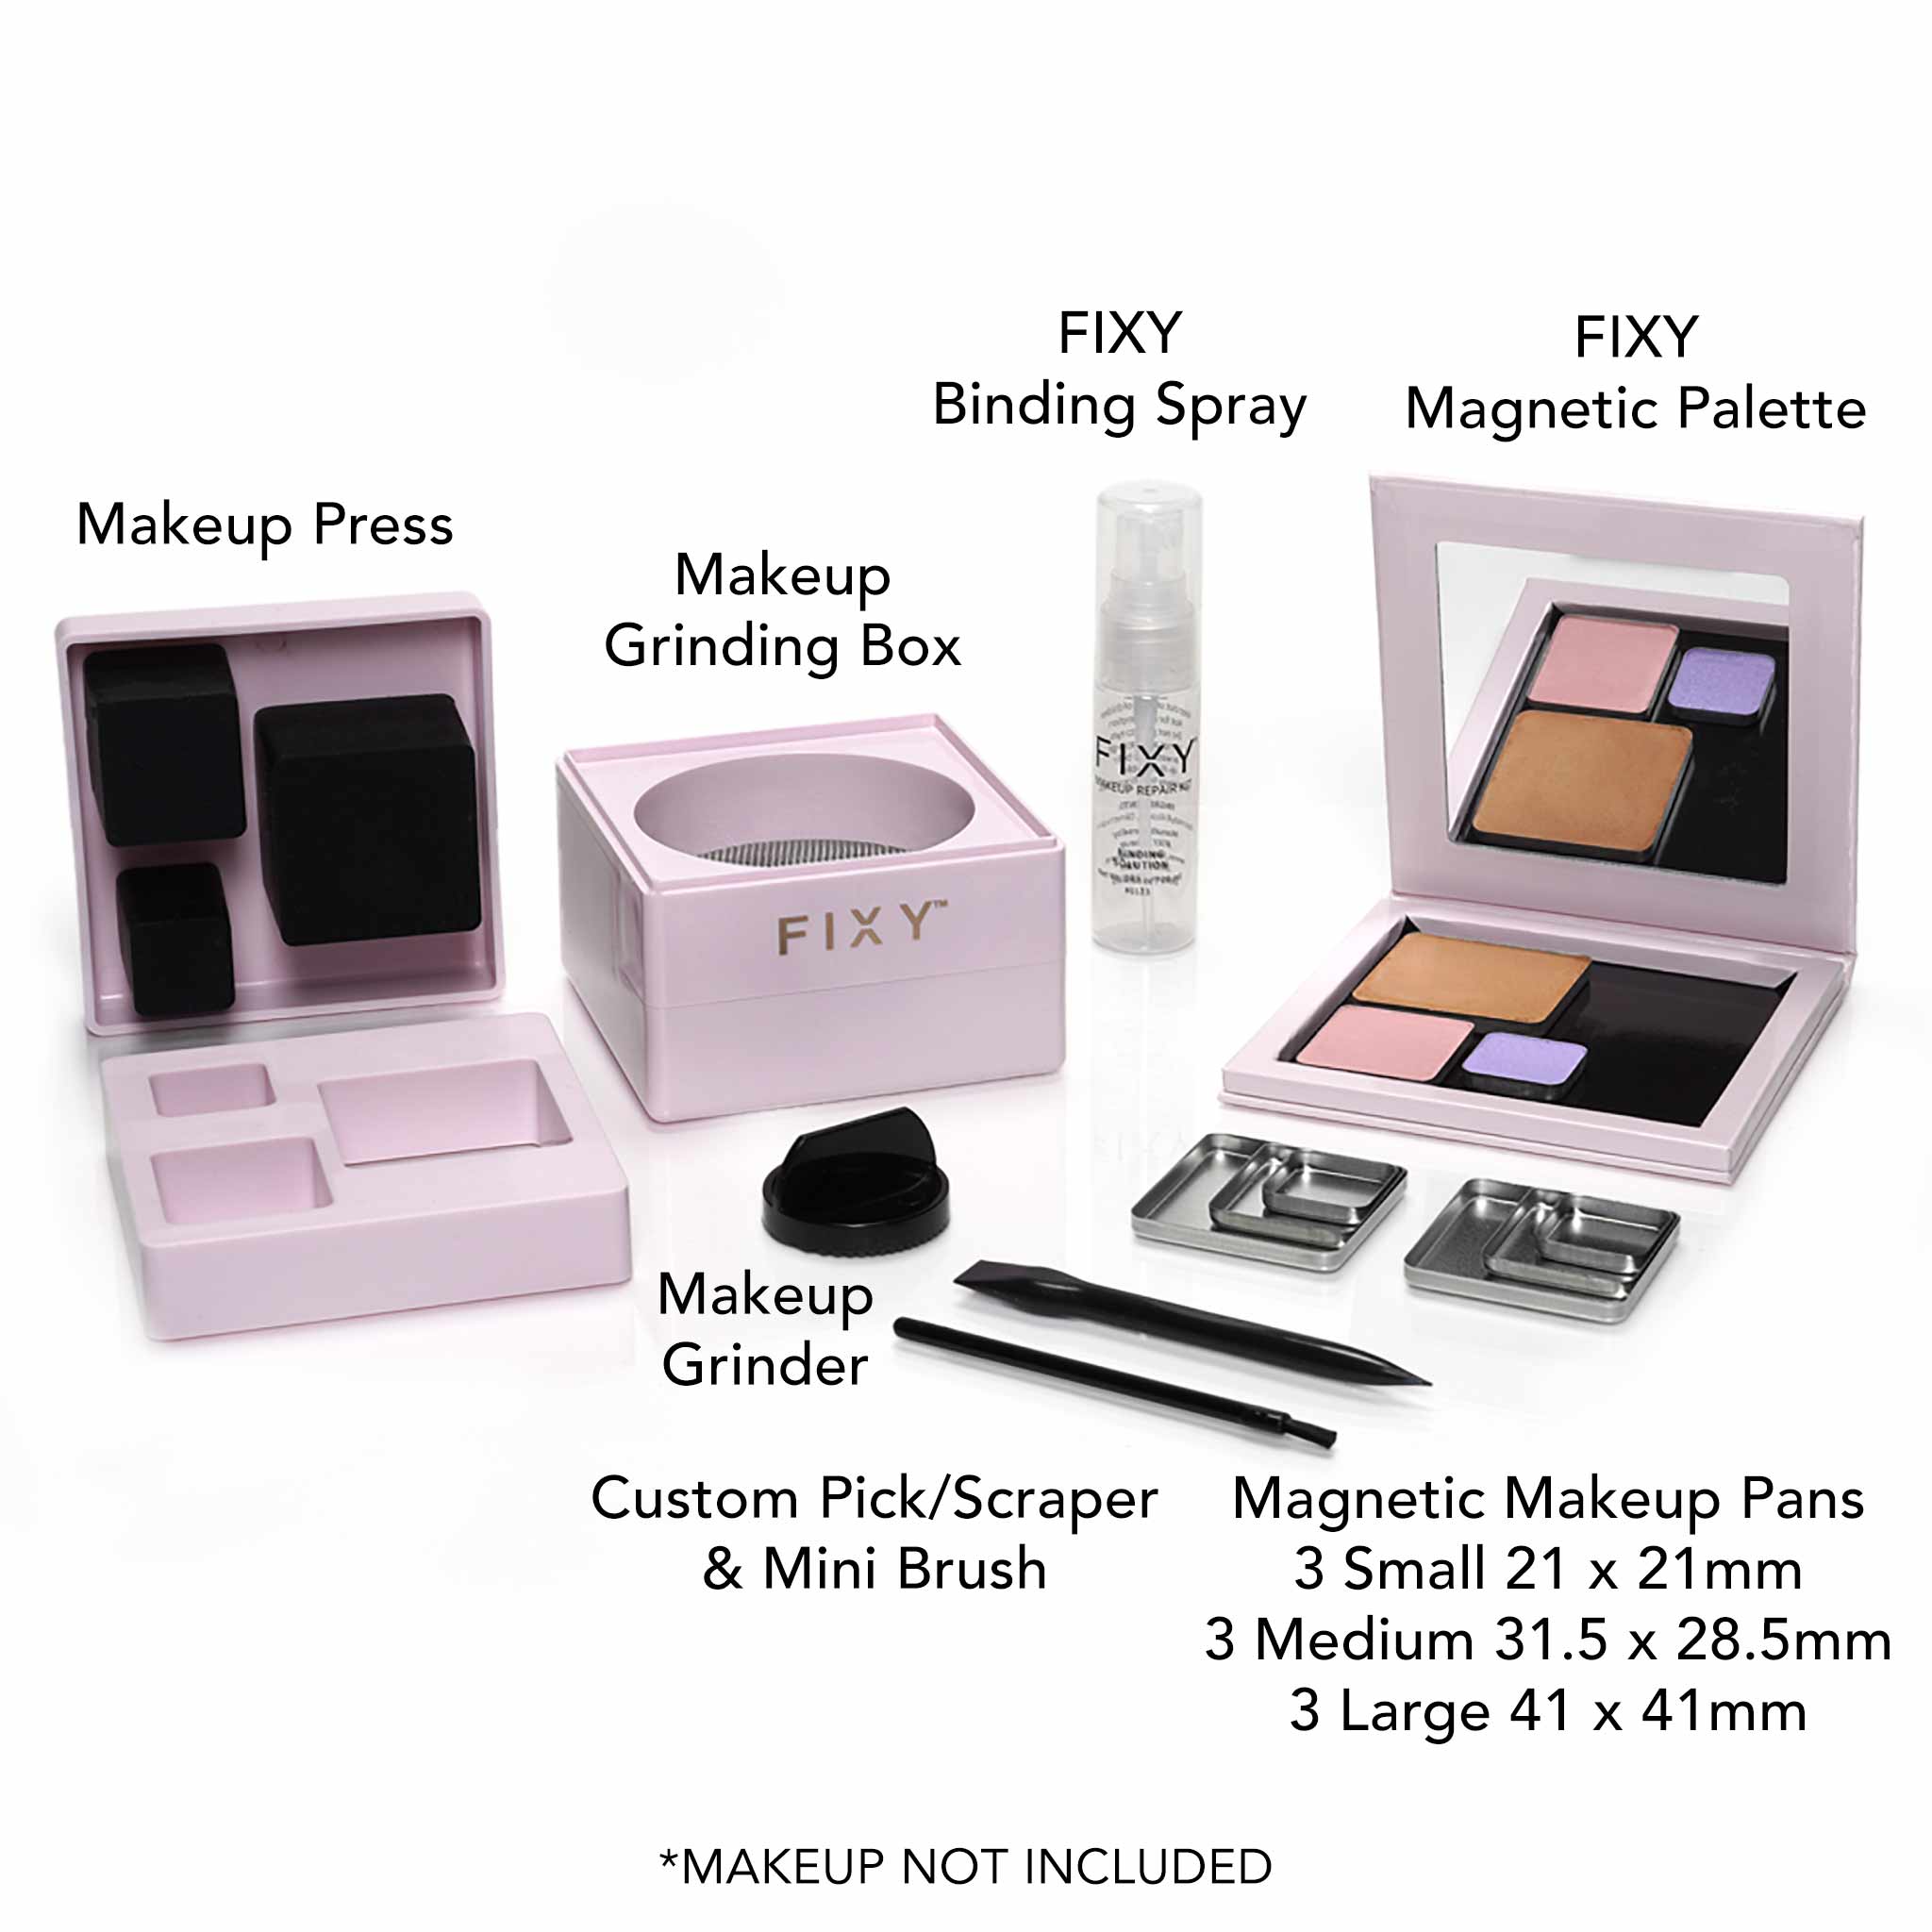 FIXY Makeup Repressing Kit Square, perfect for repairing broken makeup and depotting, includes a Makeup Press, Grinding Box, Grinder, Binding Spray, Magnetic Palette, Pick/Scraper with Mini Brush, plus small (21x21mm), medium (31.5x28.5mm), and large (41x41mm) Magnetic Makeup Pans. Note: Makeup not included.